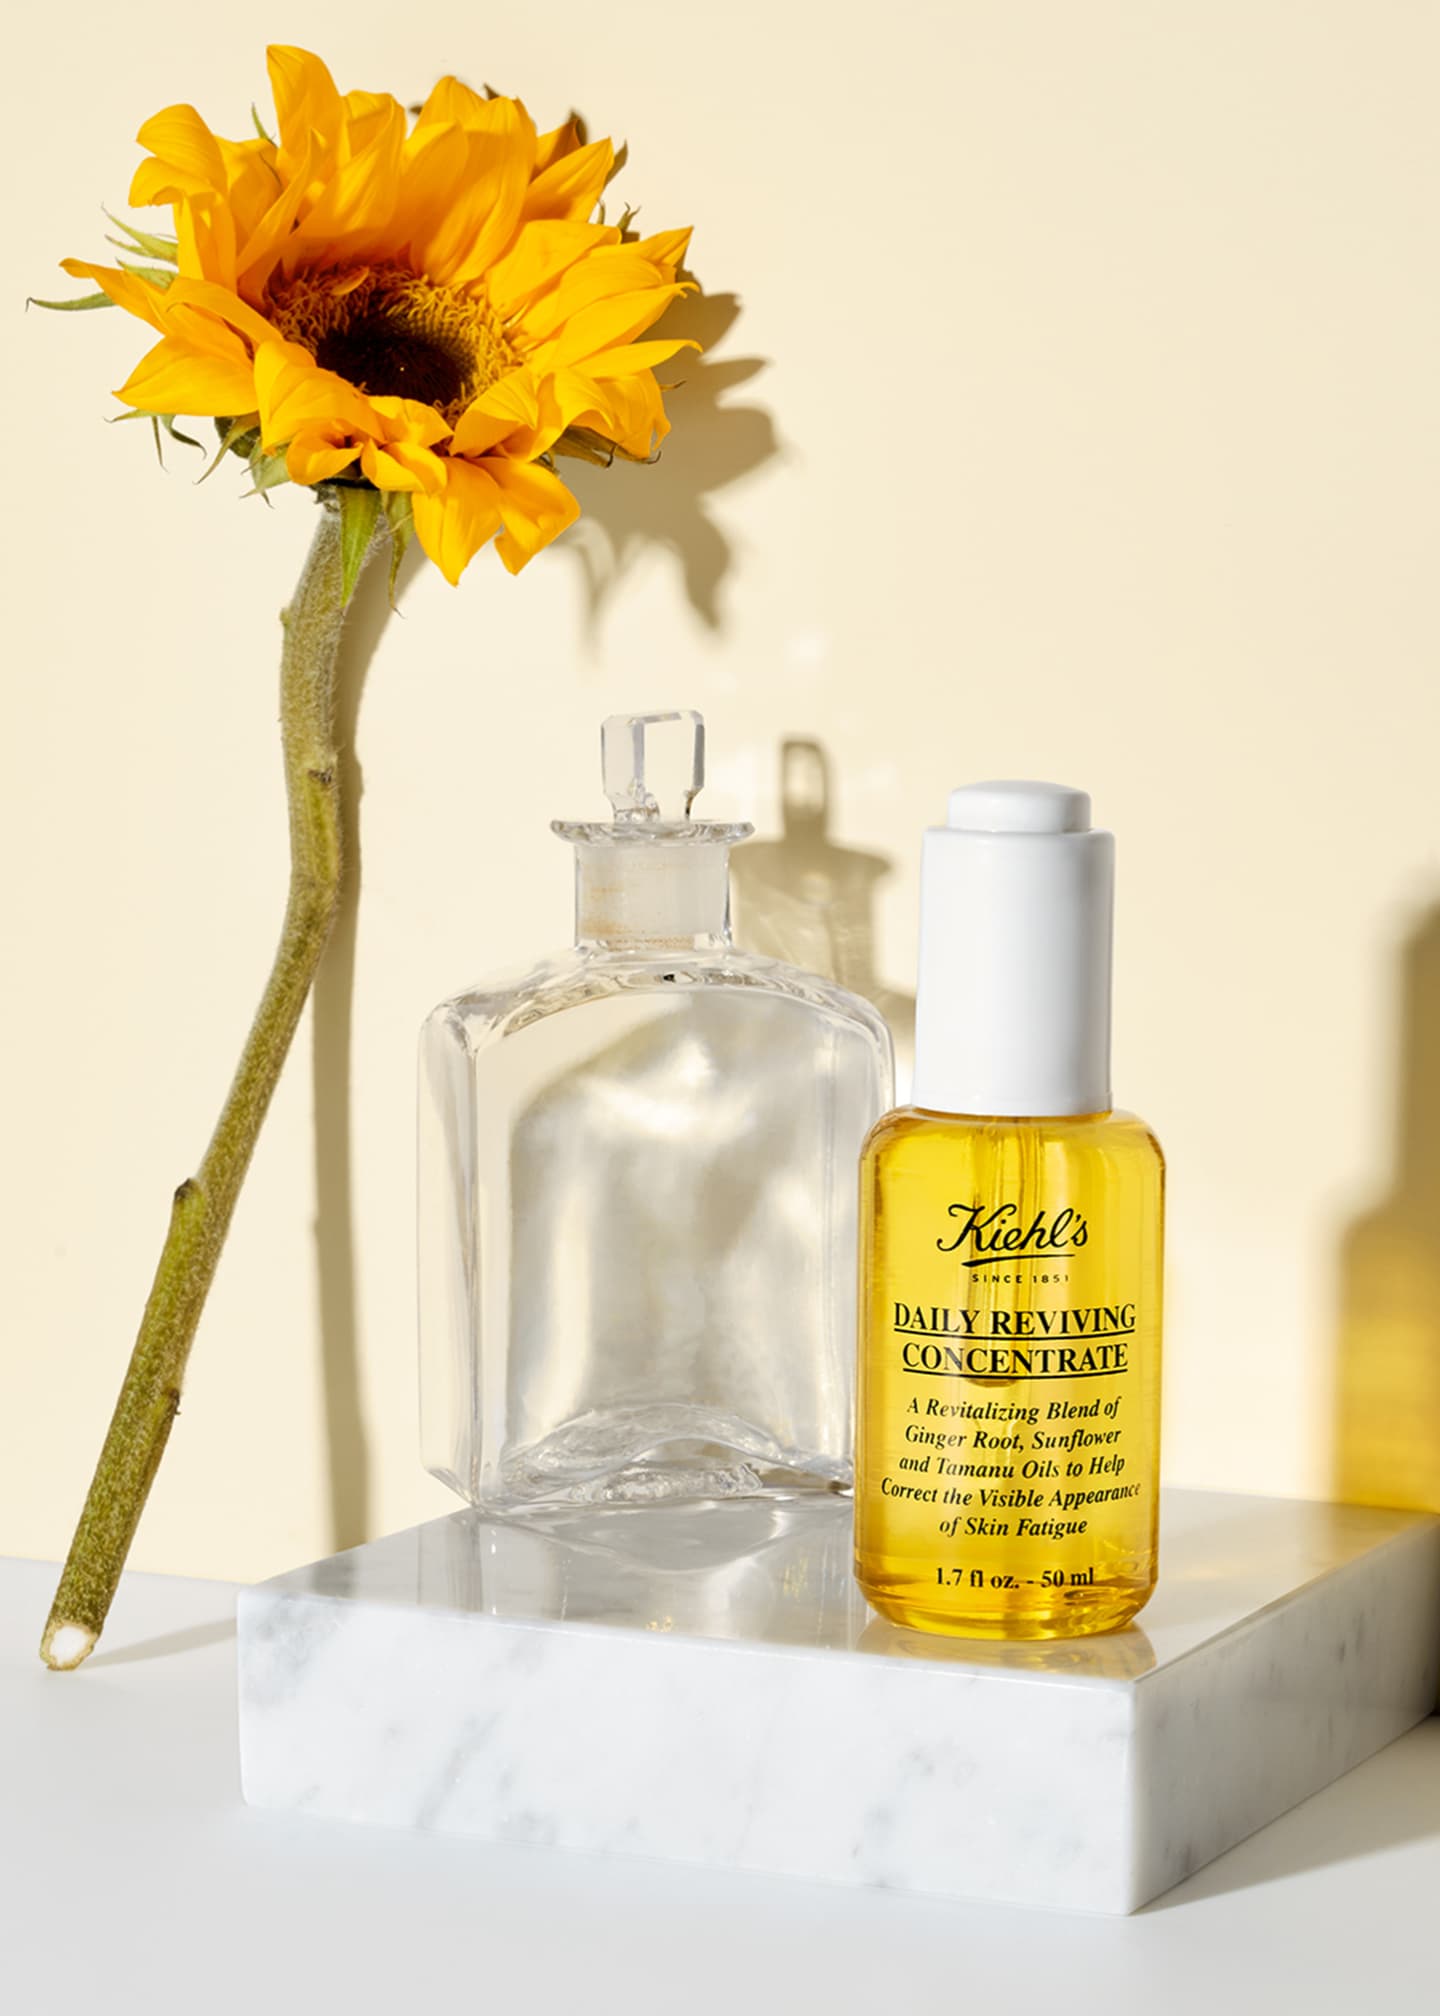 Kiehl's Since 1851 Daily Reviving Concentrate, 1.7 oz. Image 4 of 5